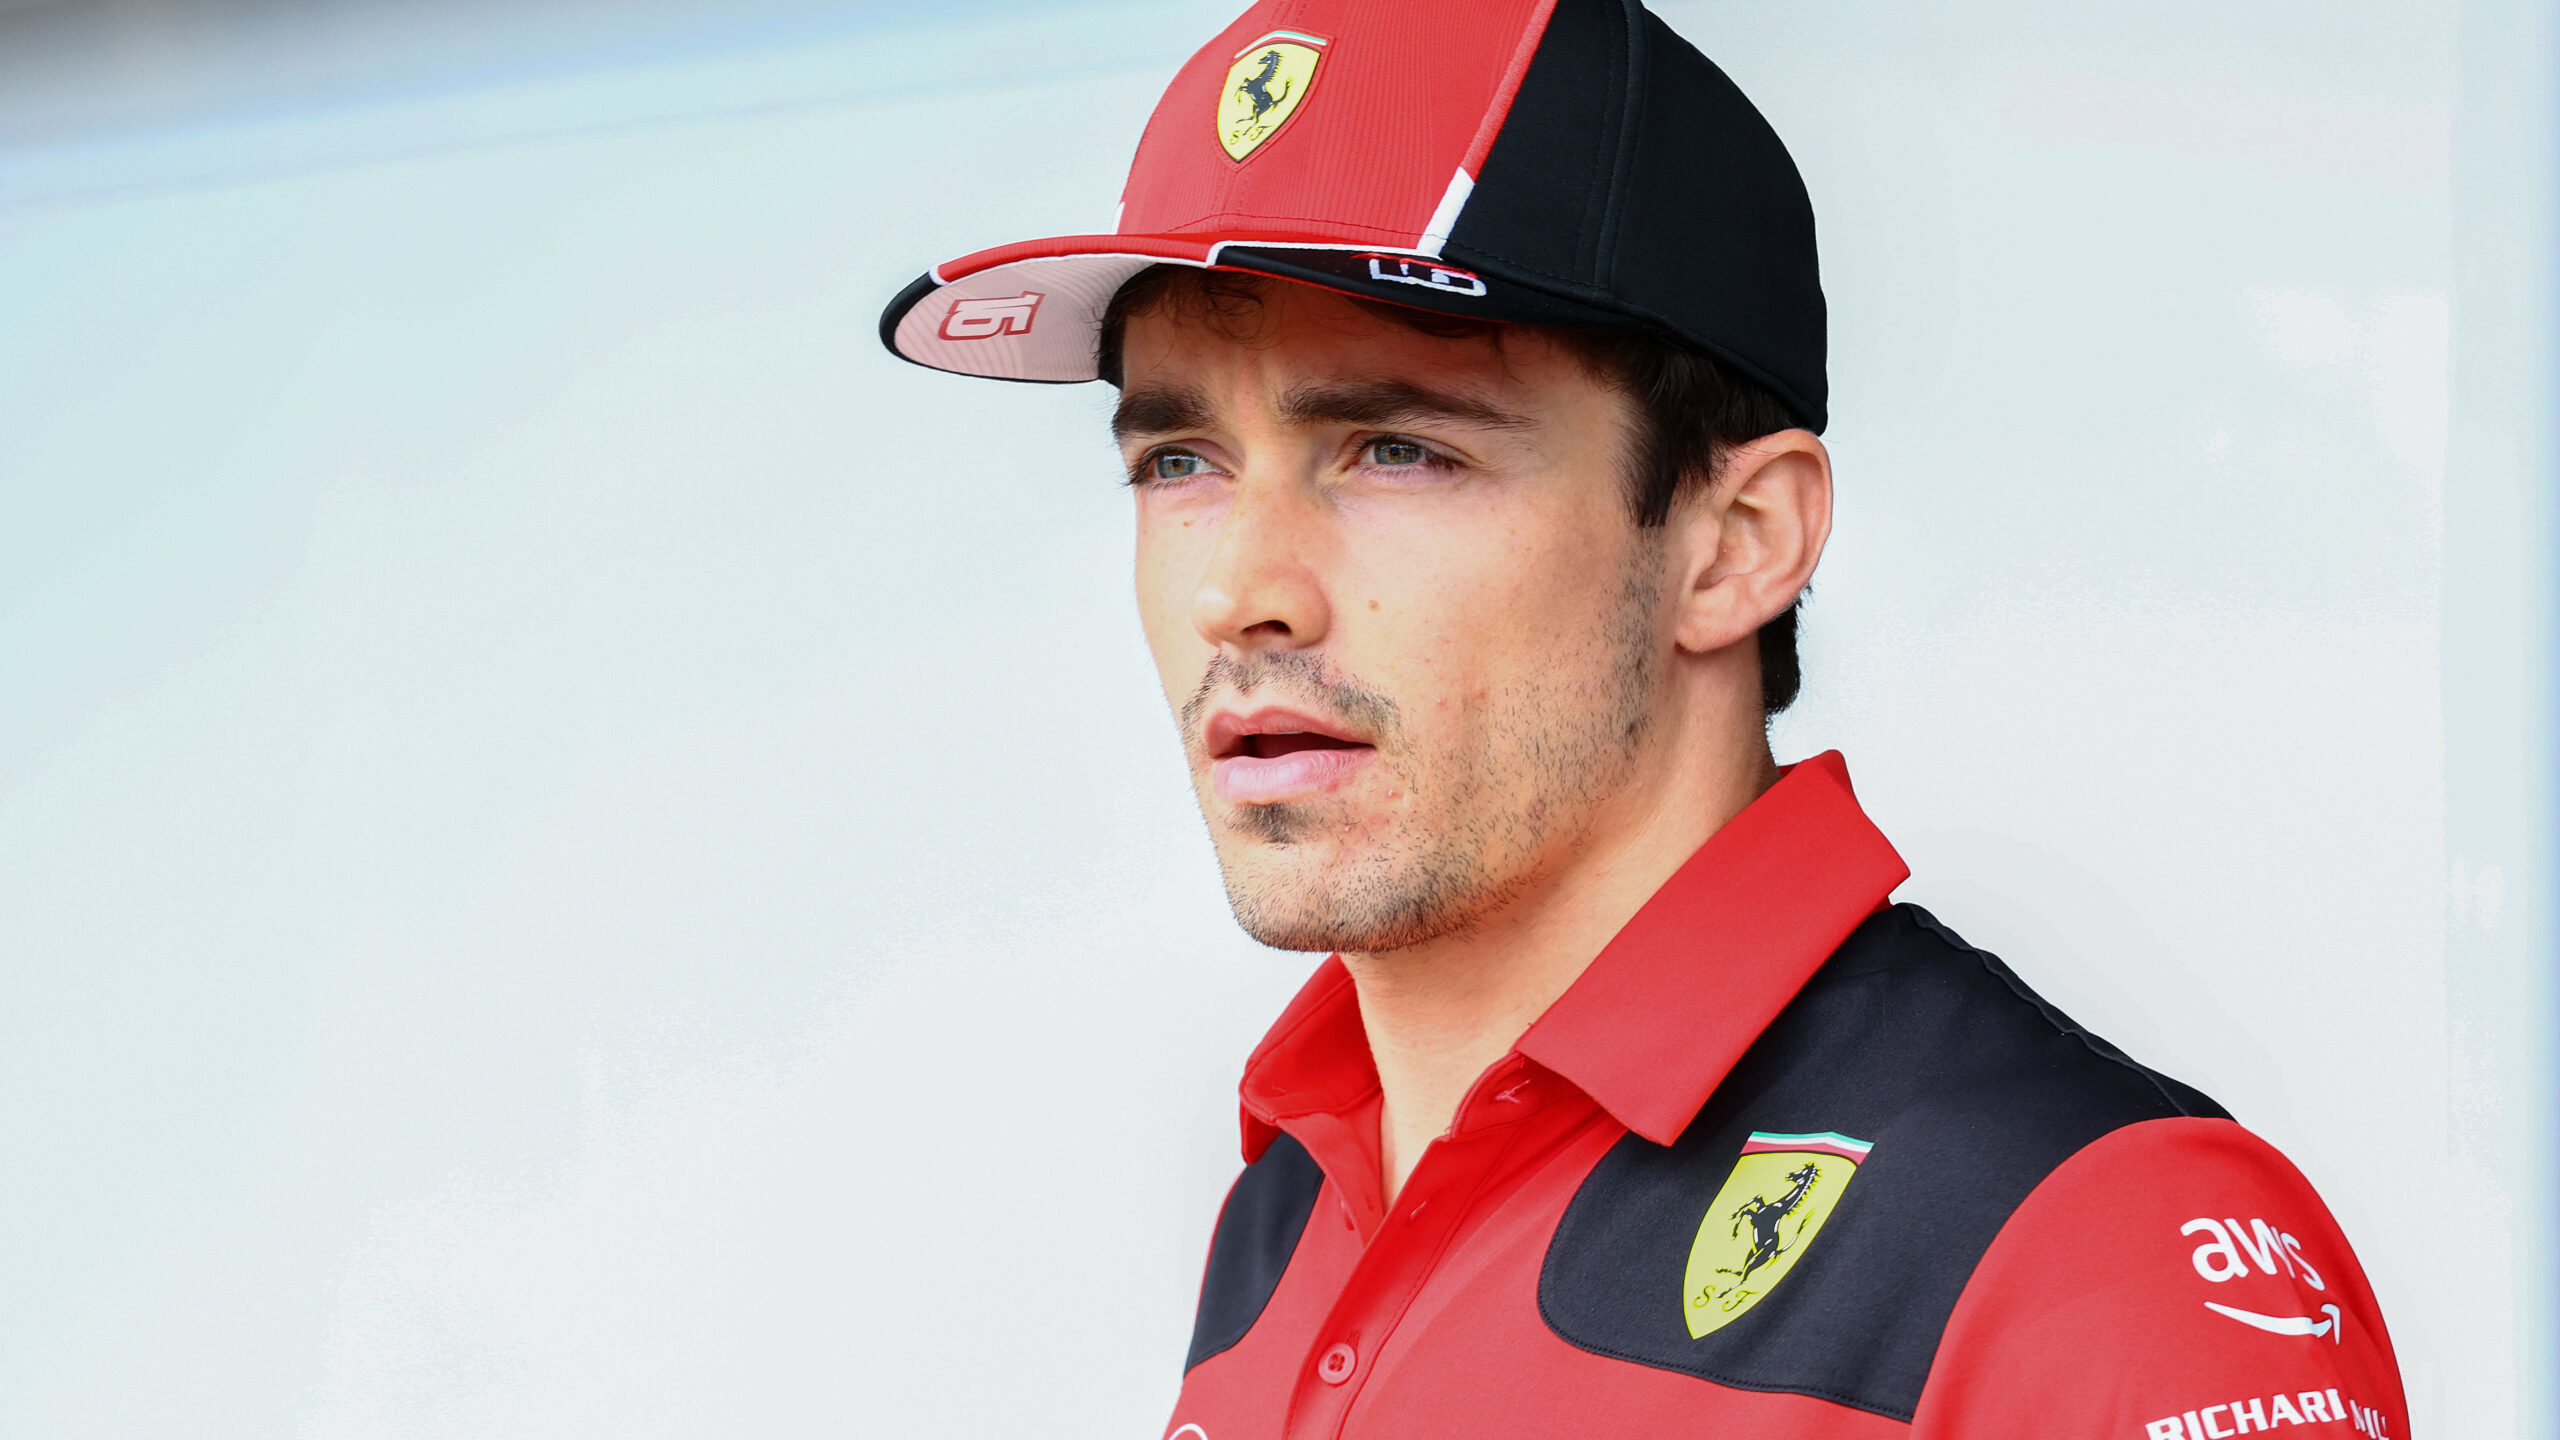 Ferrari F1 Driver Charles Leclerc Released a Single on Spotify. Naturally, Here’s My Review